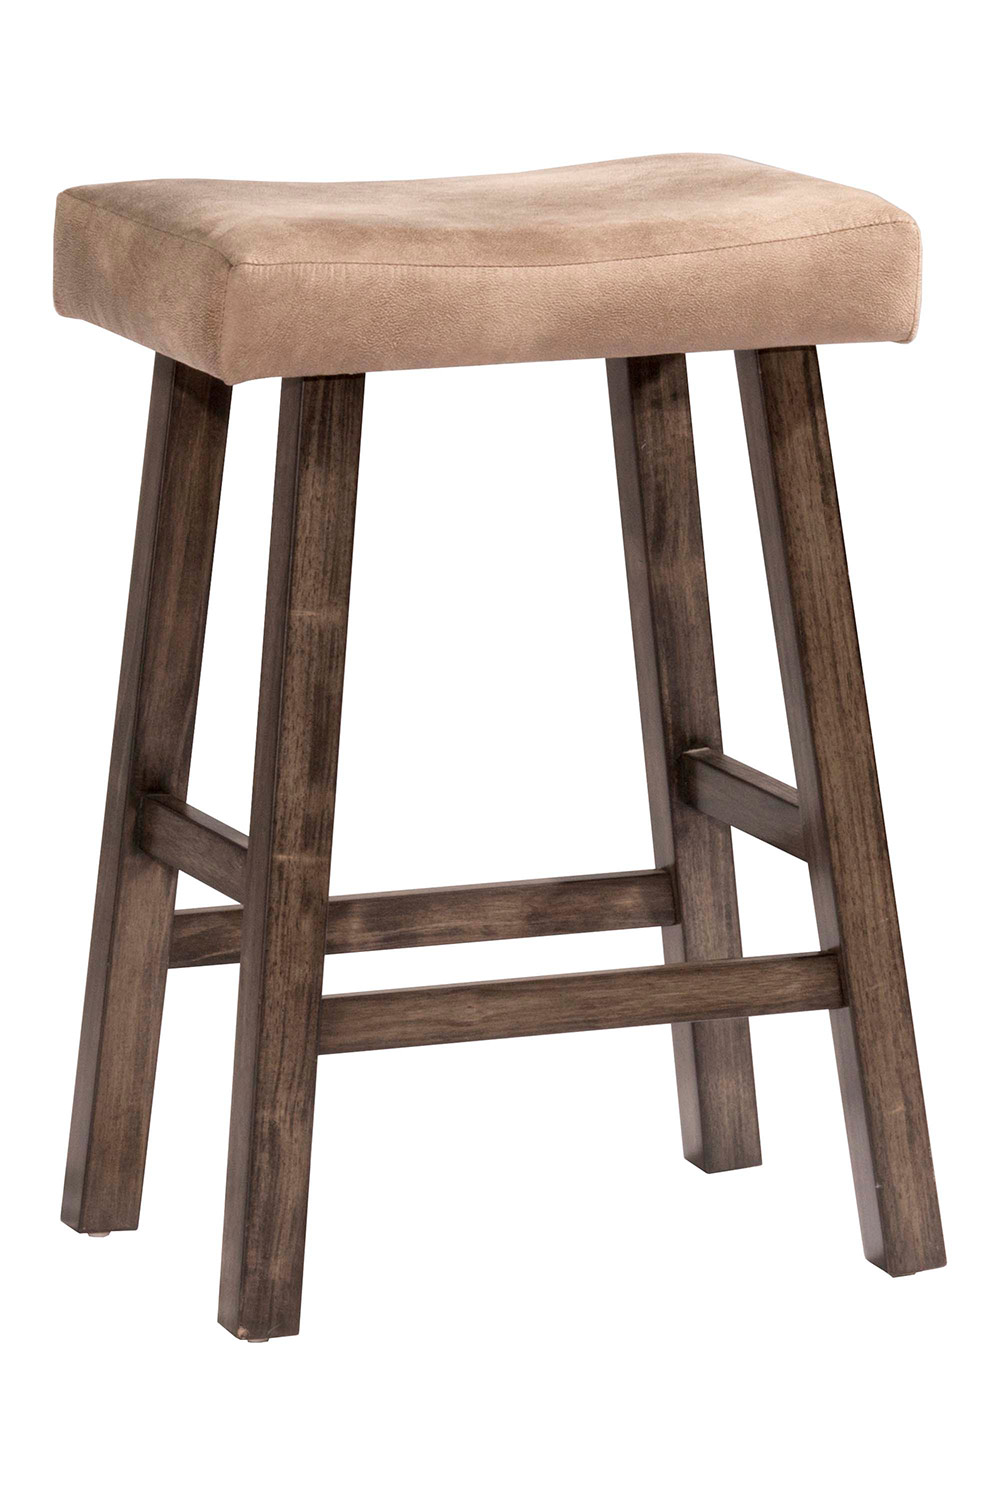 Hillsdale Saddle Non-Swivel Backless Counter Stool - Rustic Gray - Taupe Faux Leather